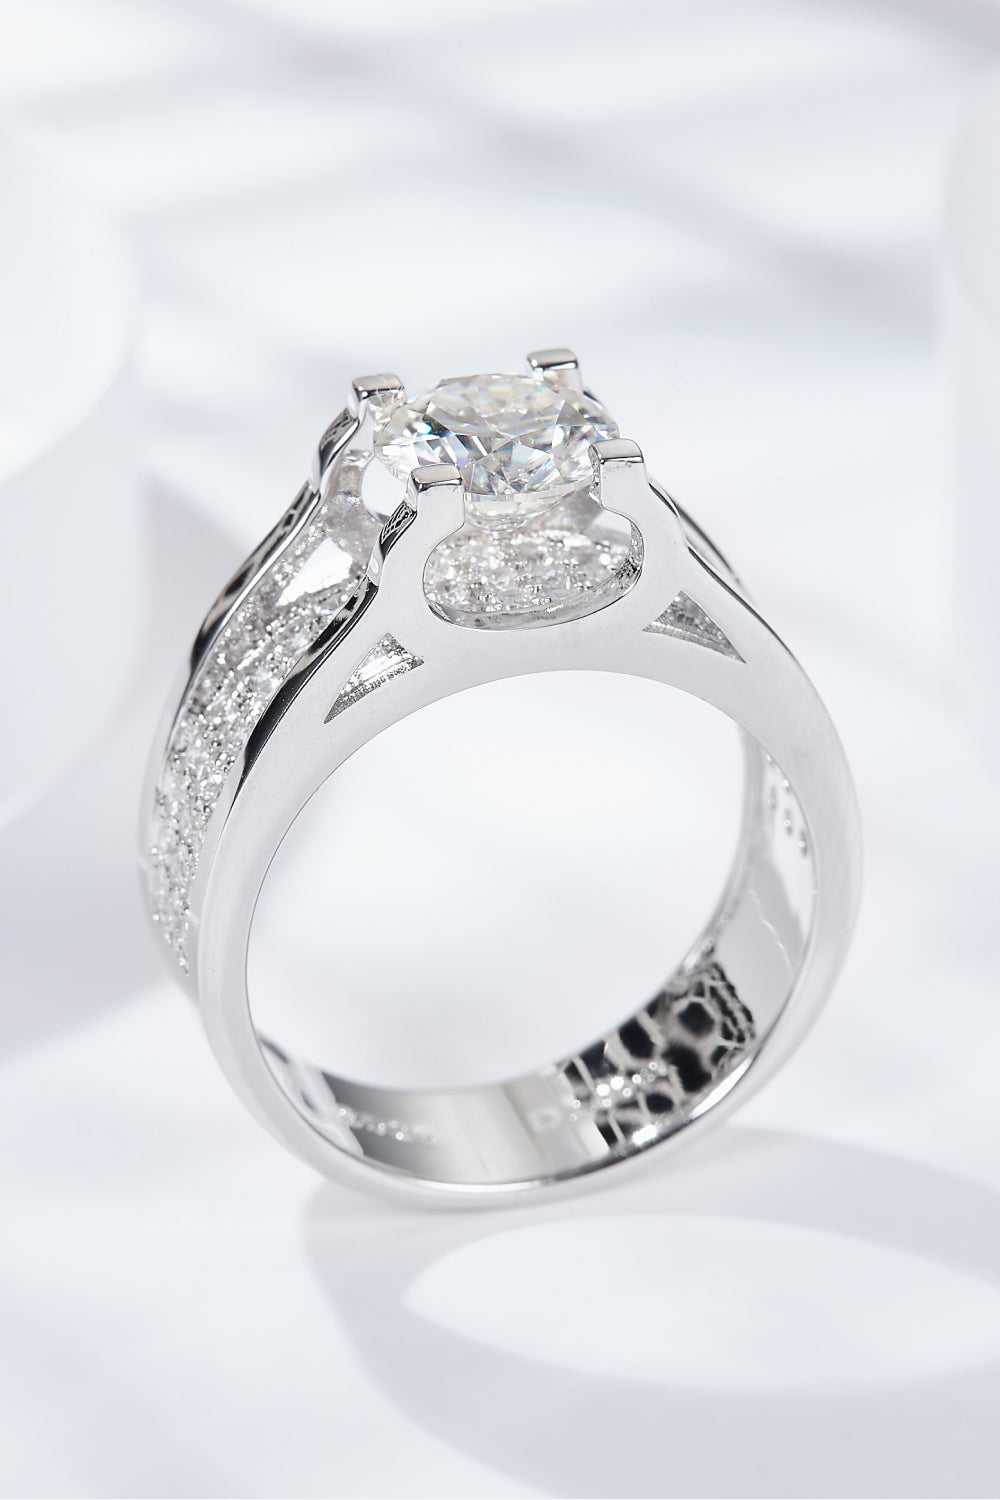 Made To Shine 1 Carat Moissanite Ring - Tophatter Deals